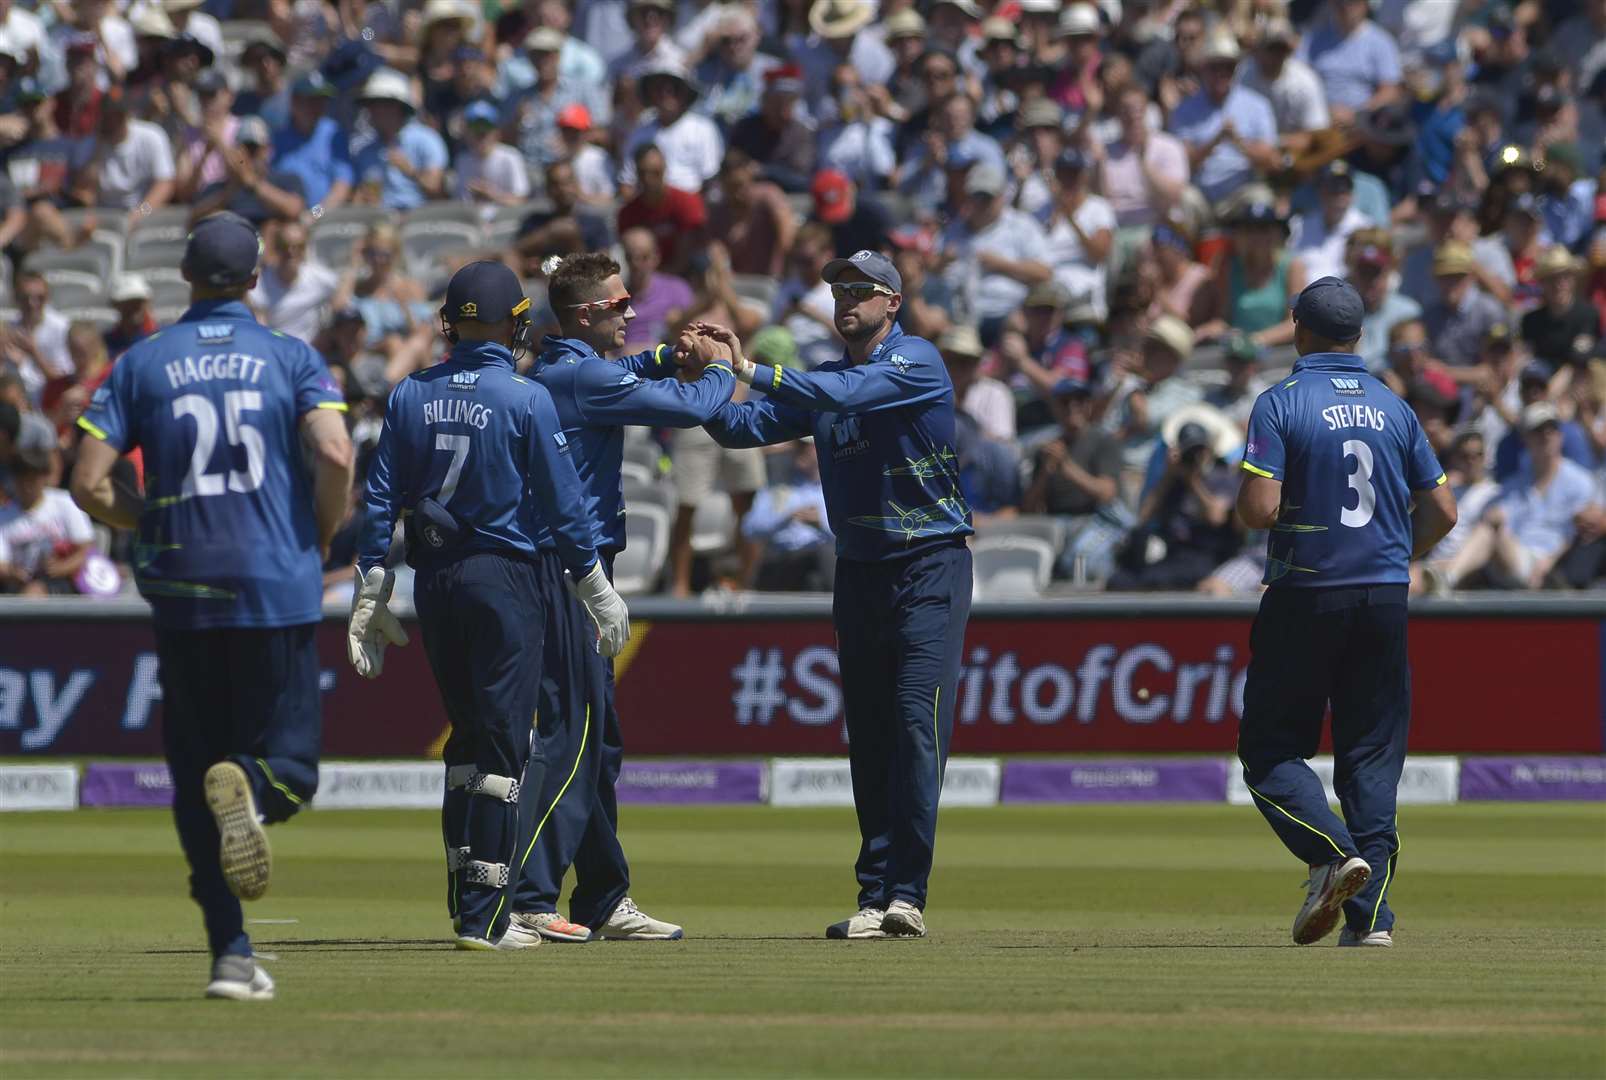 Action from Kent's Royal London One-Day Cup final against Hampshire at Lord's. Picture Ady Kerry